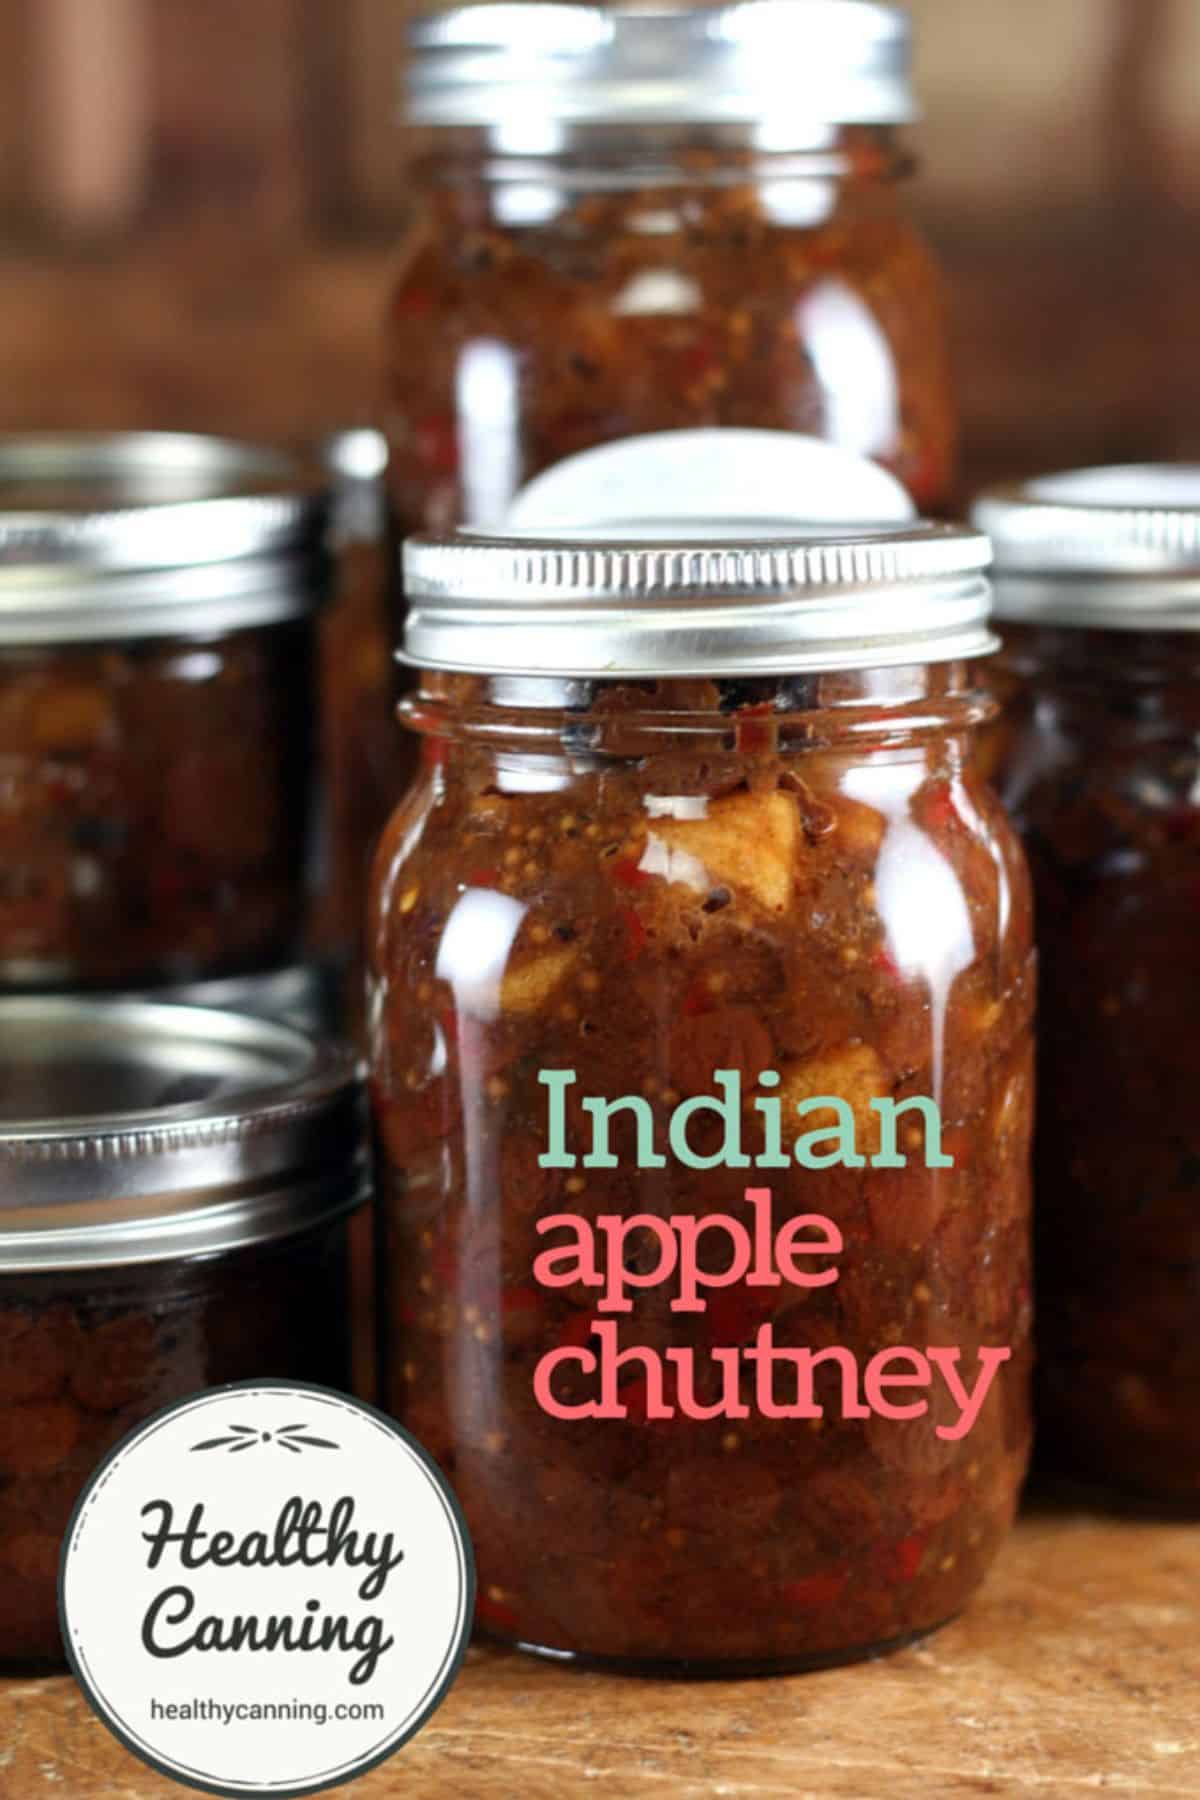 Deliicous indian apple chutney canned in glass jars.